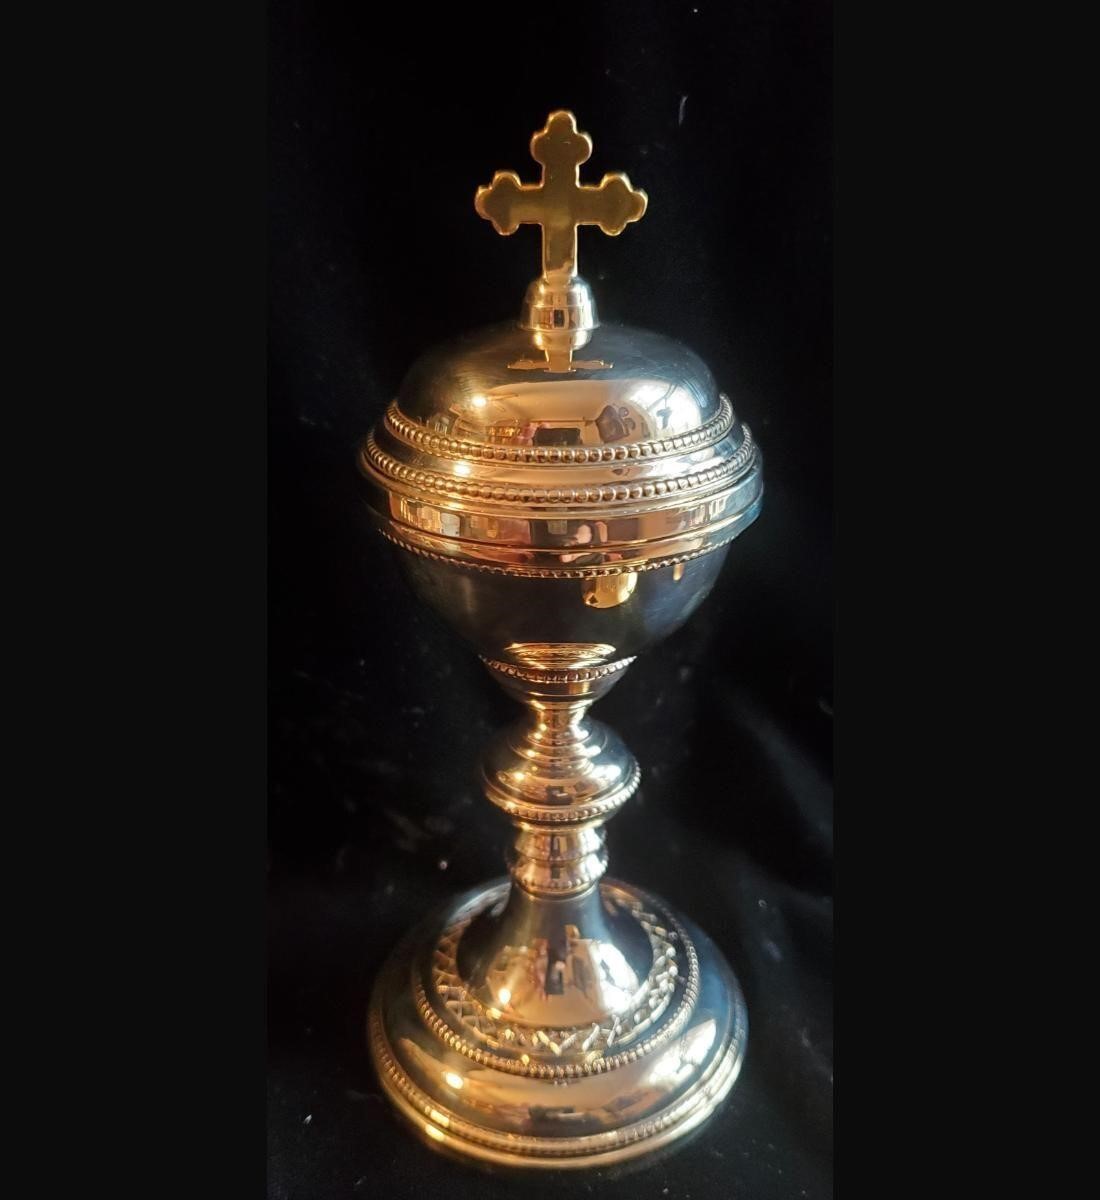 A Very Traditional Traveling Chalice And Ciborium